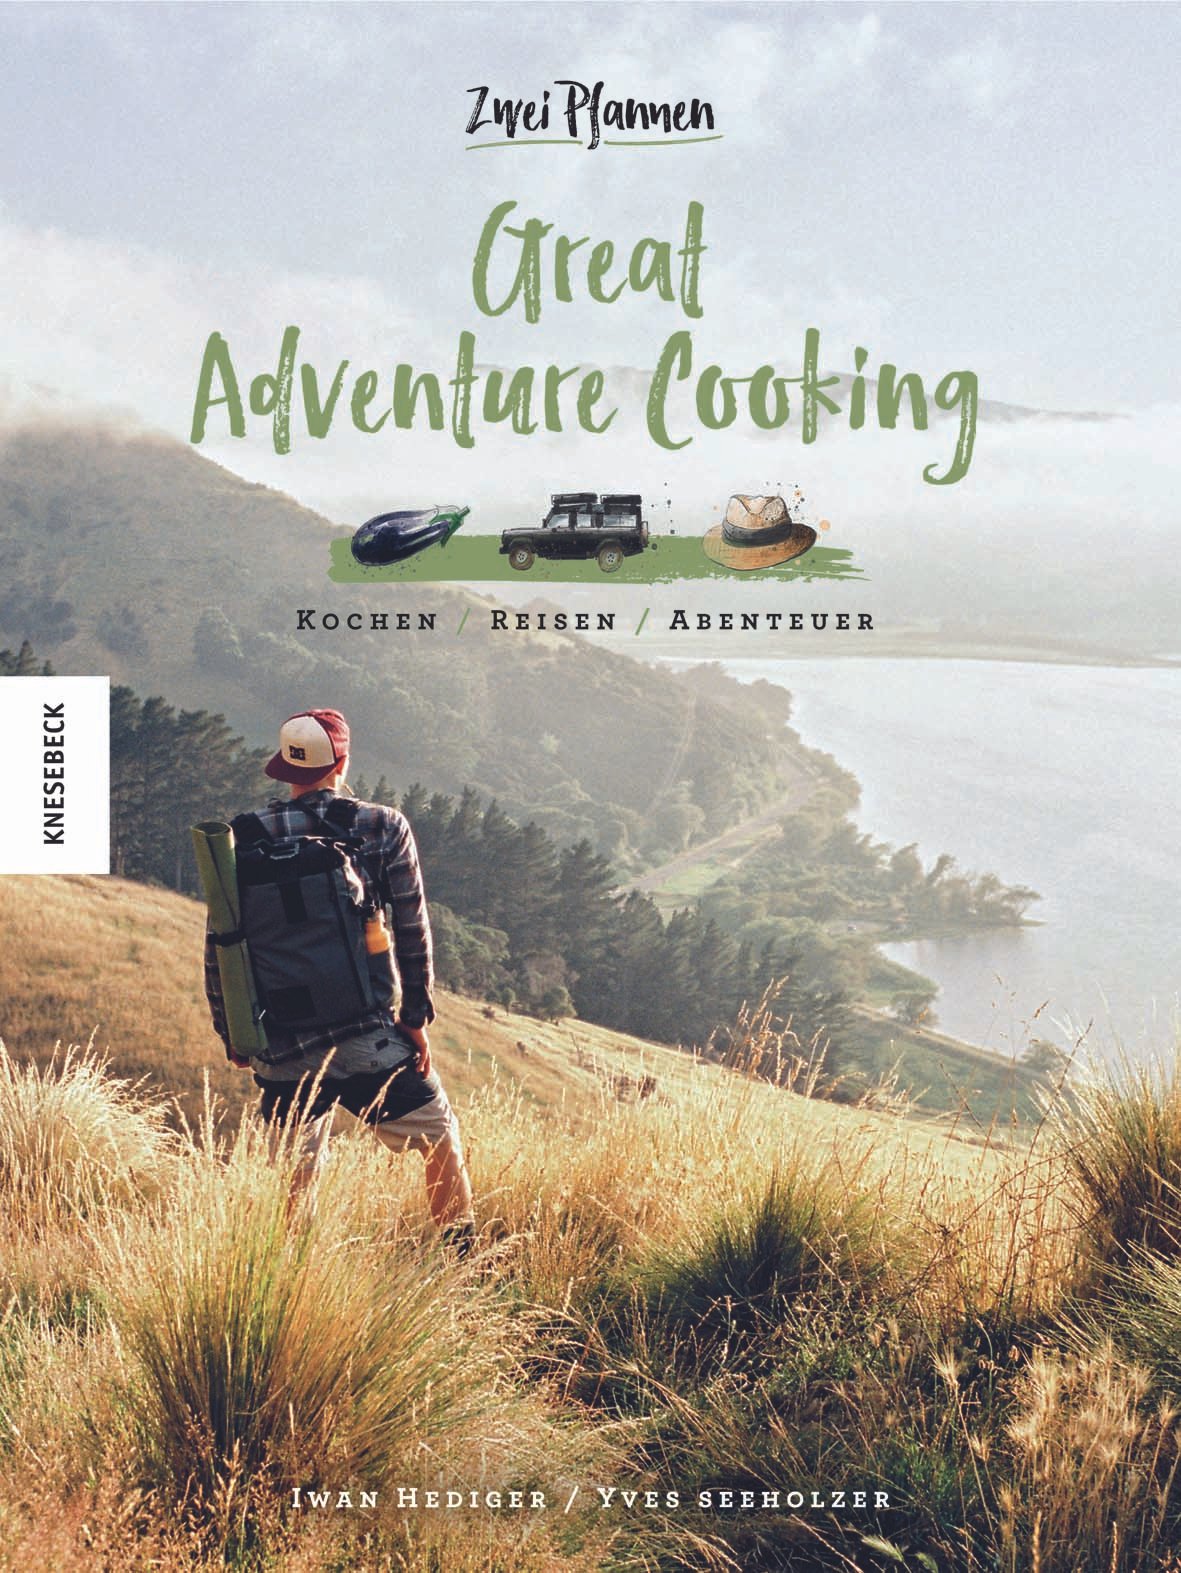 266-8_cover_great-adventure-cooking_2d.jpg